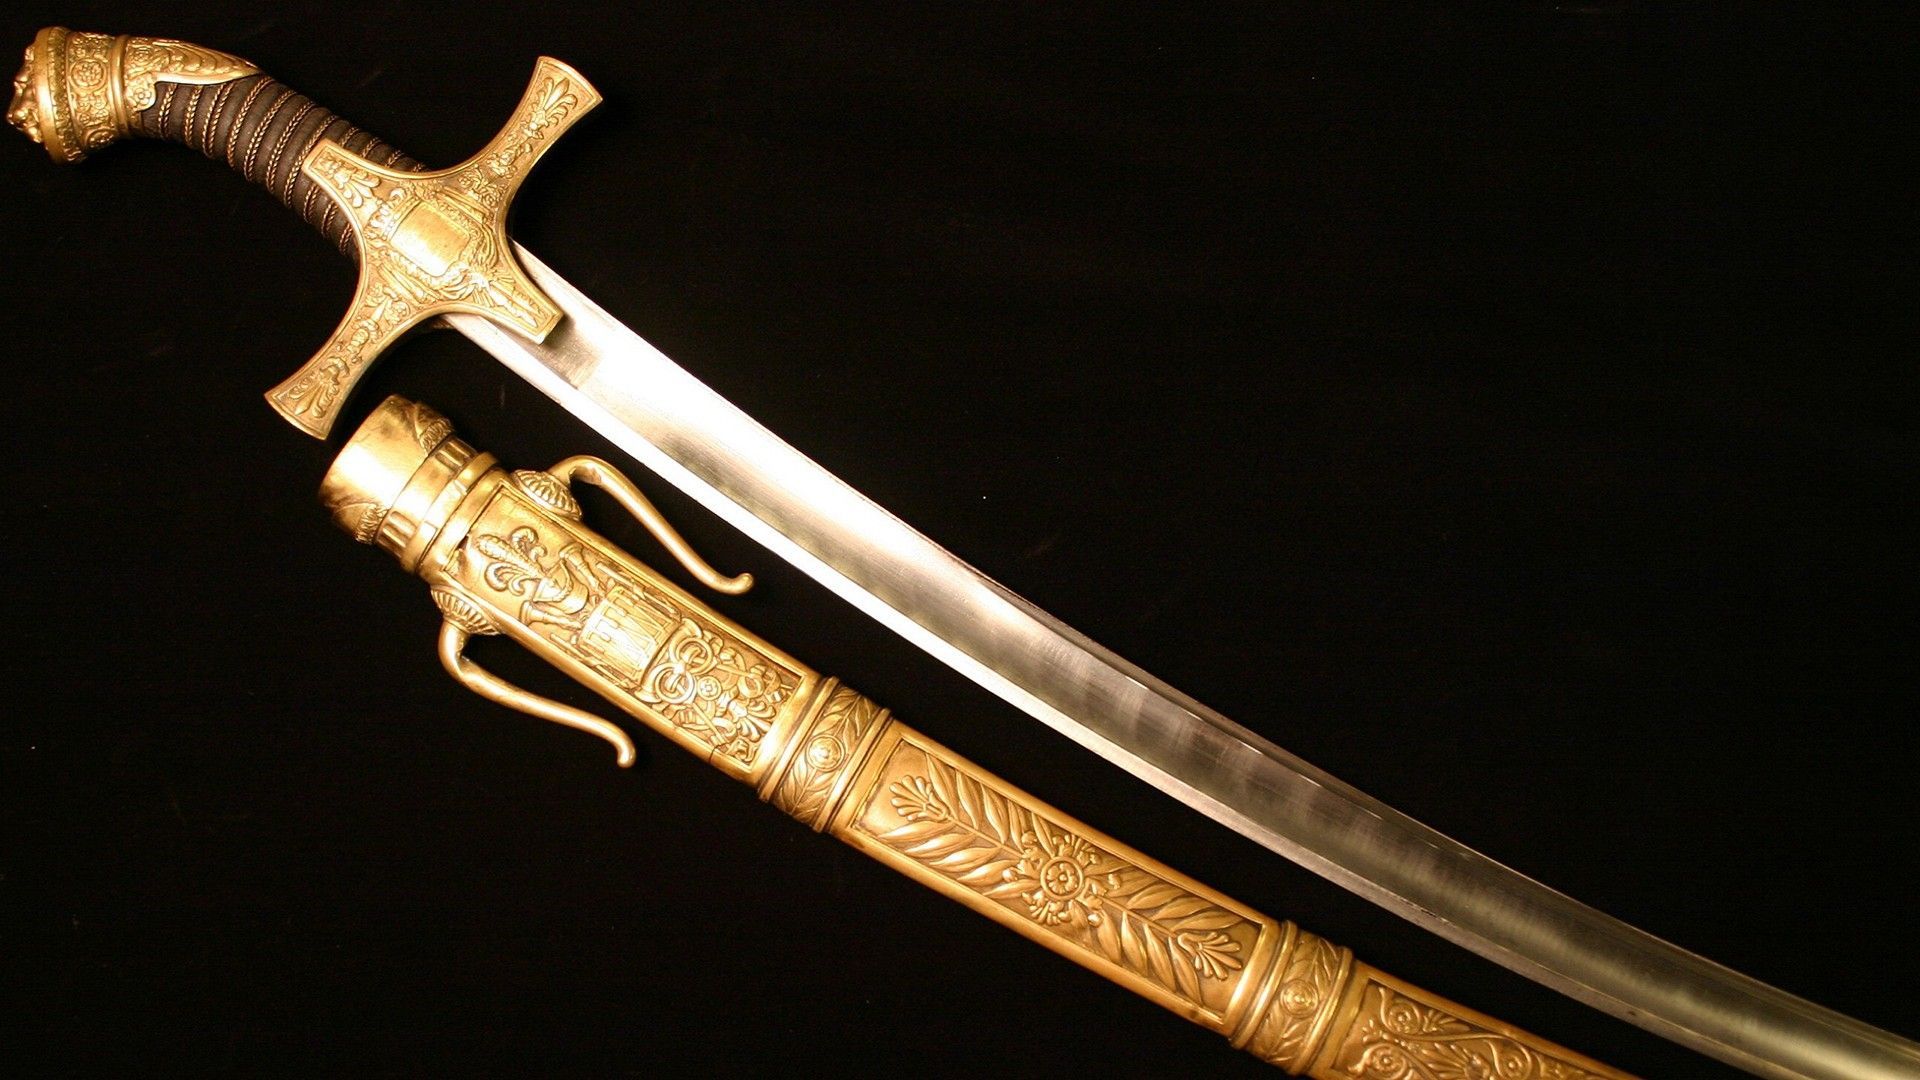 9 Sword HD Wallpapers Backgrounds - Wallpaper Abyss